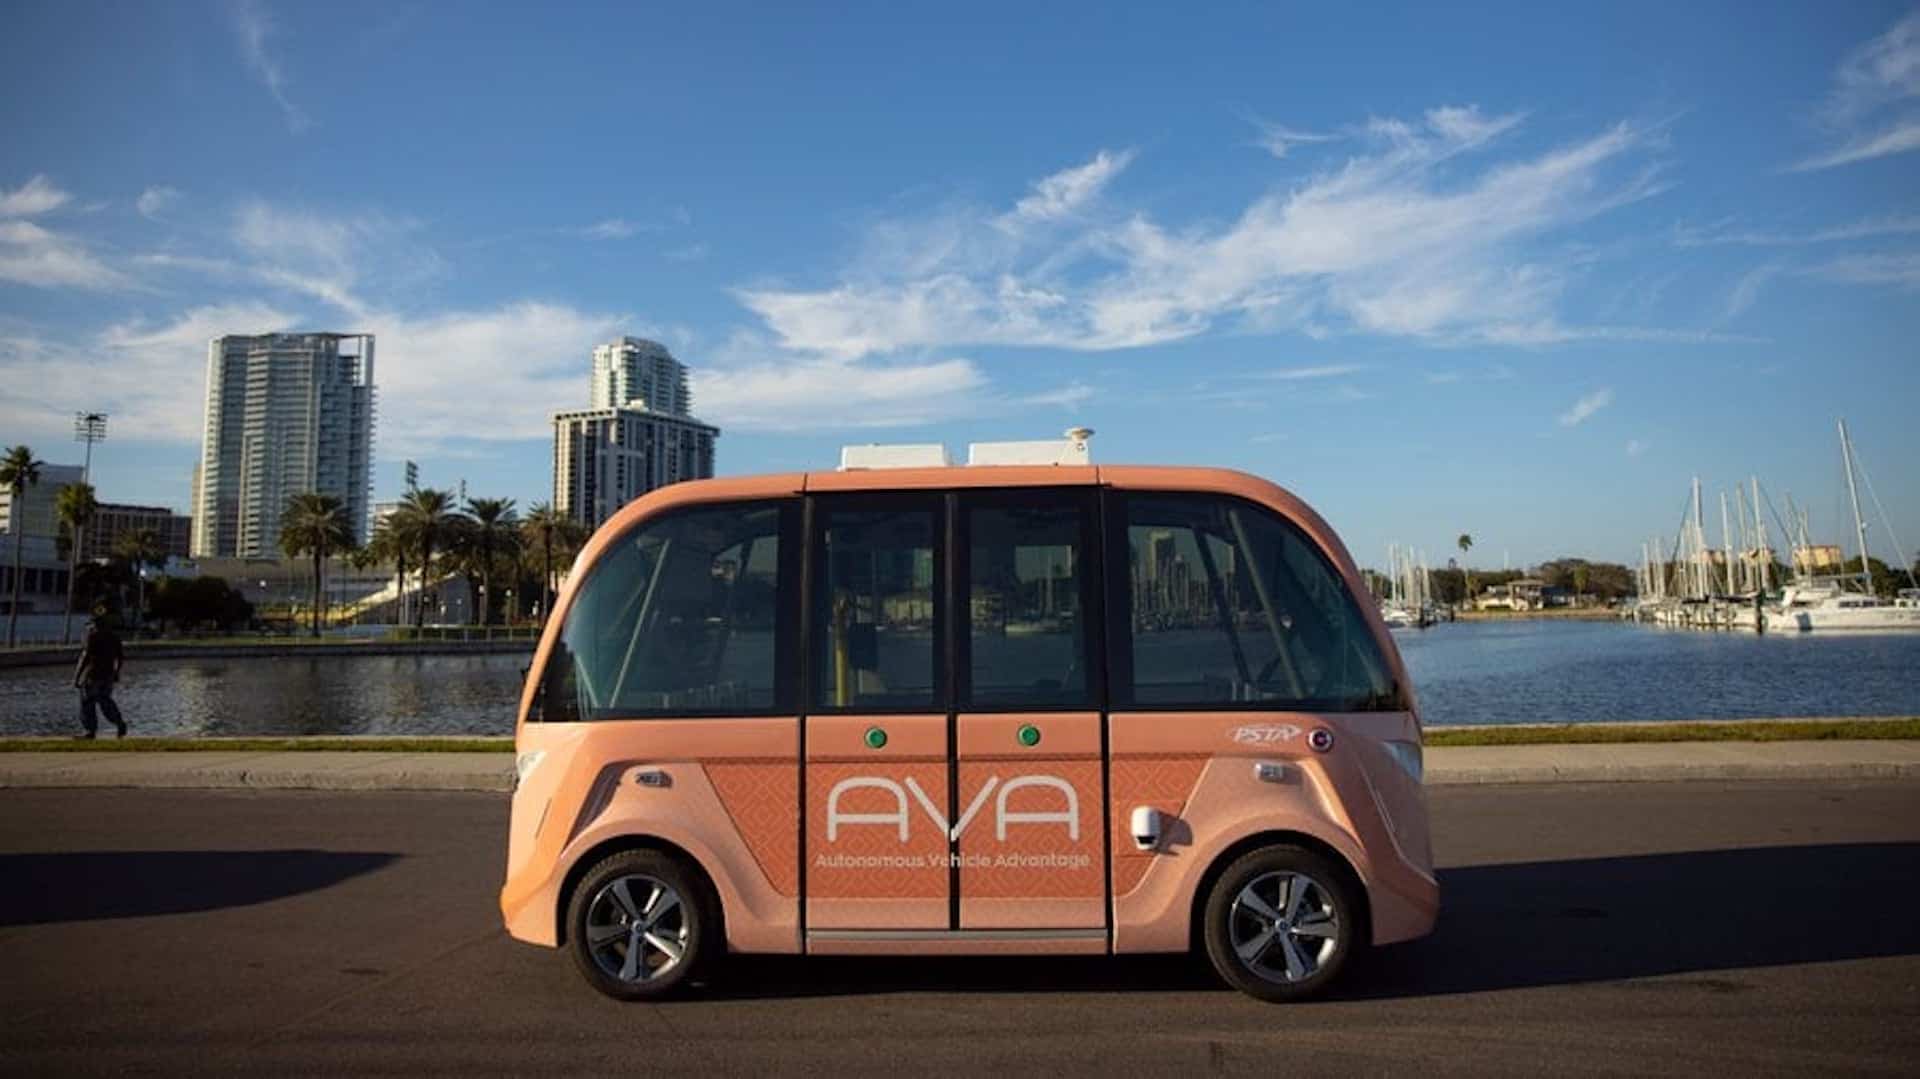 PSTA unveils AVA, an electric selfdriving vehicle that will operate on